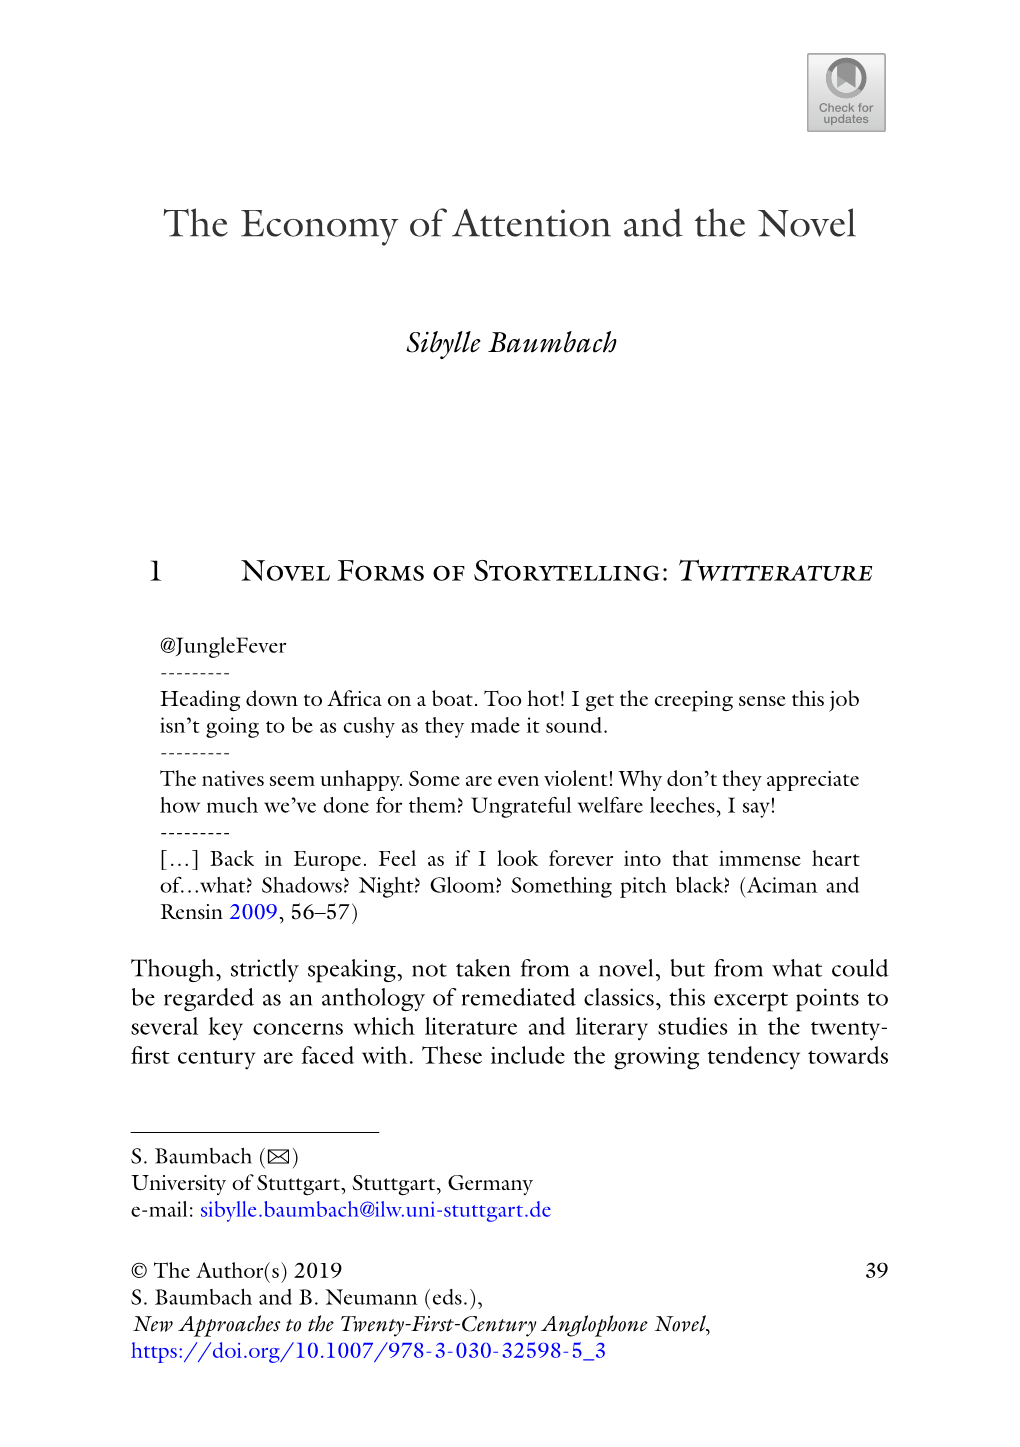 The Economy of Attention and the Novel